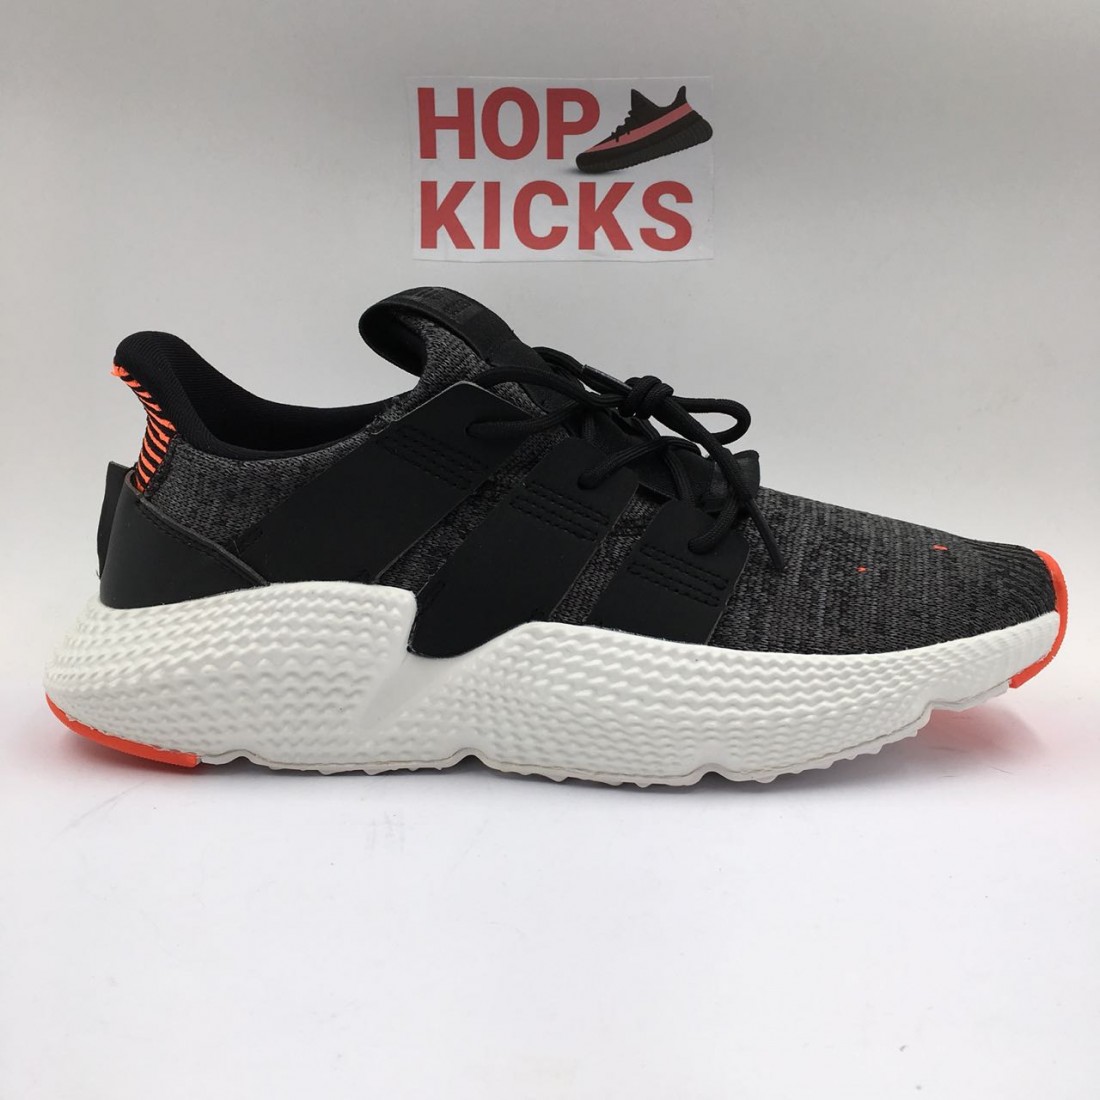 Buy Online ADIDAS PROPHERE "REAL CLIMACOOL Technology " [ DOT PERFECT PATTERNS ] In Pakistan | ADIDAS PROPHERE "REAL CLIMACOOL " [ DOT PERFECT PATTERNS ] Prices In Pakistan